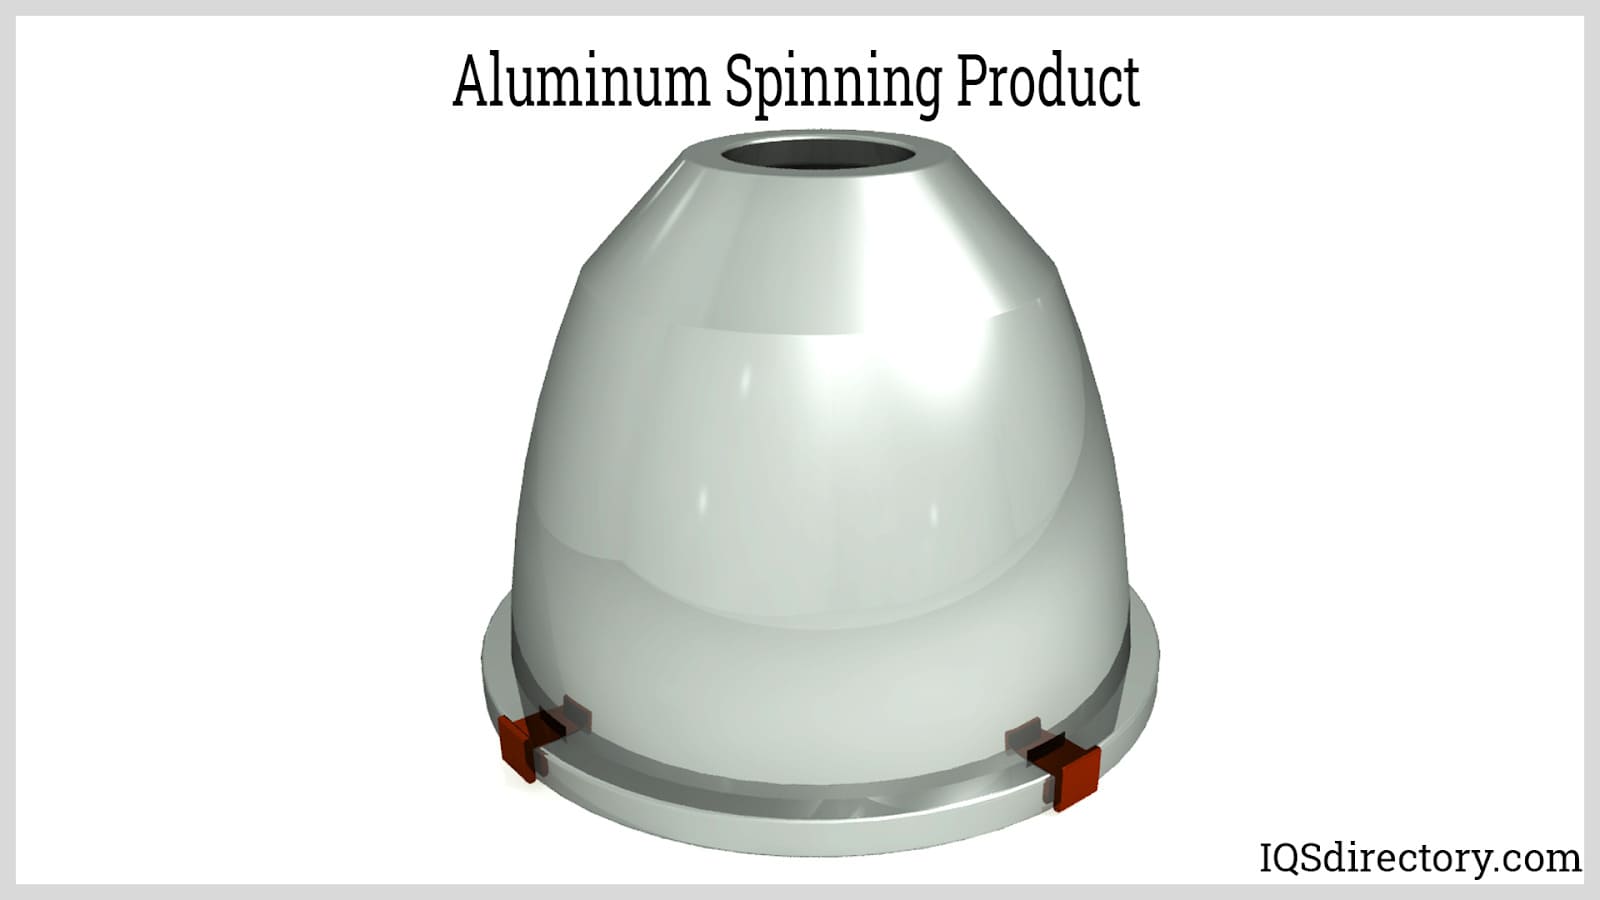 Aluminum Spinning Product